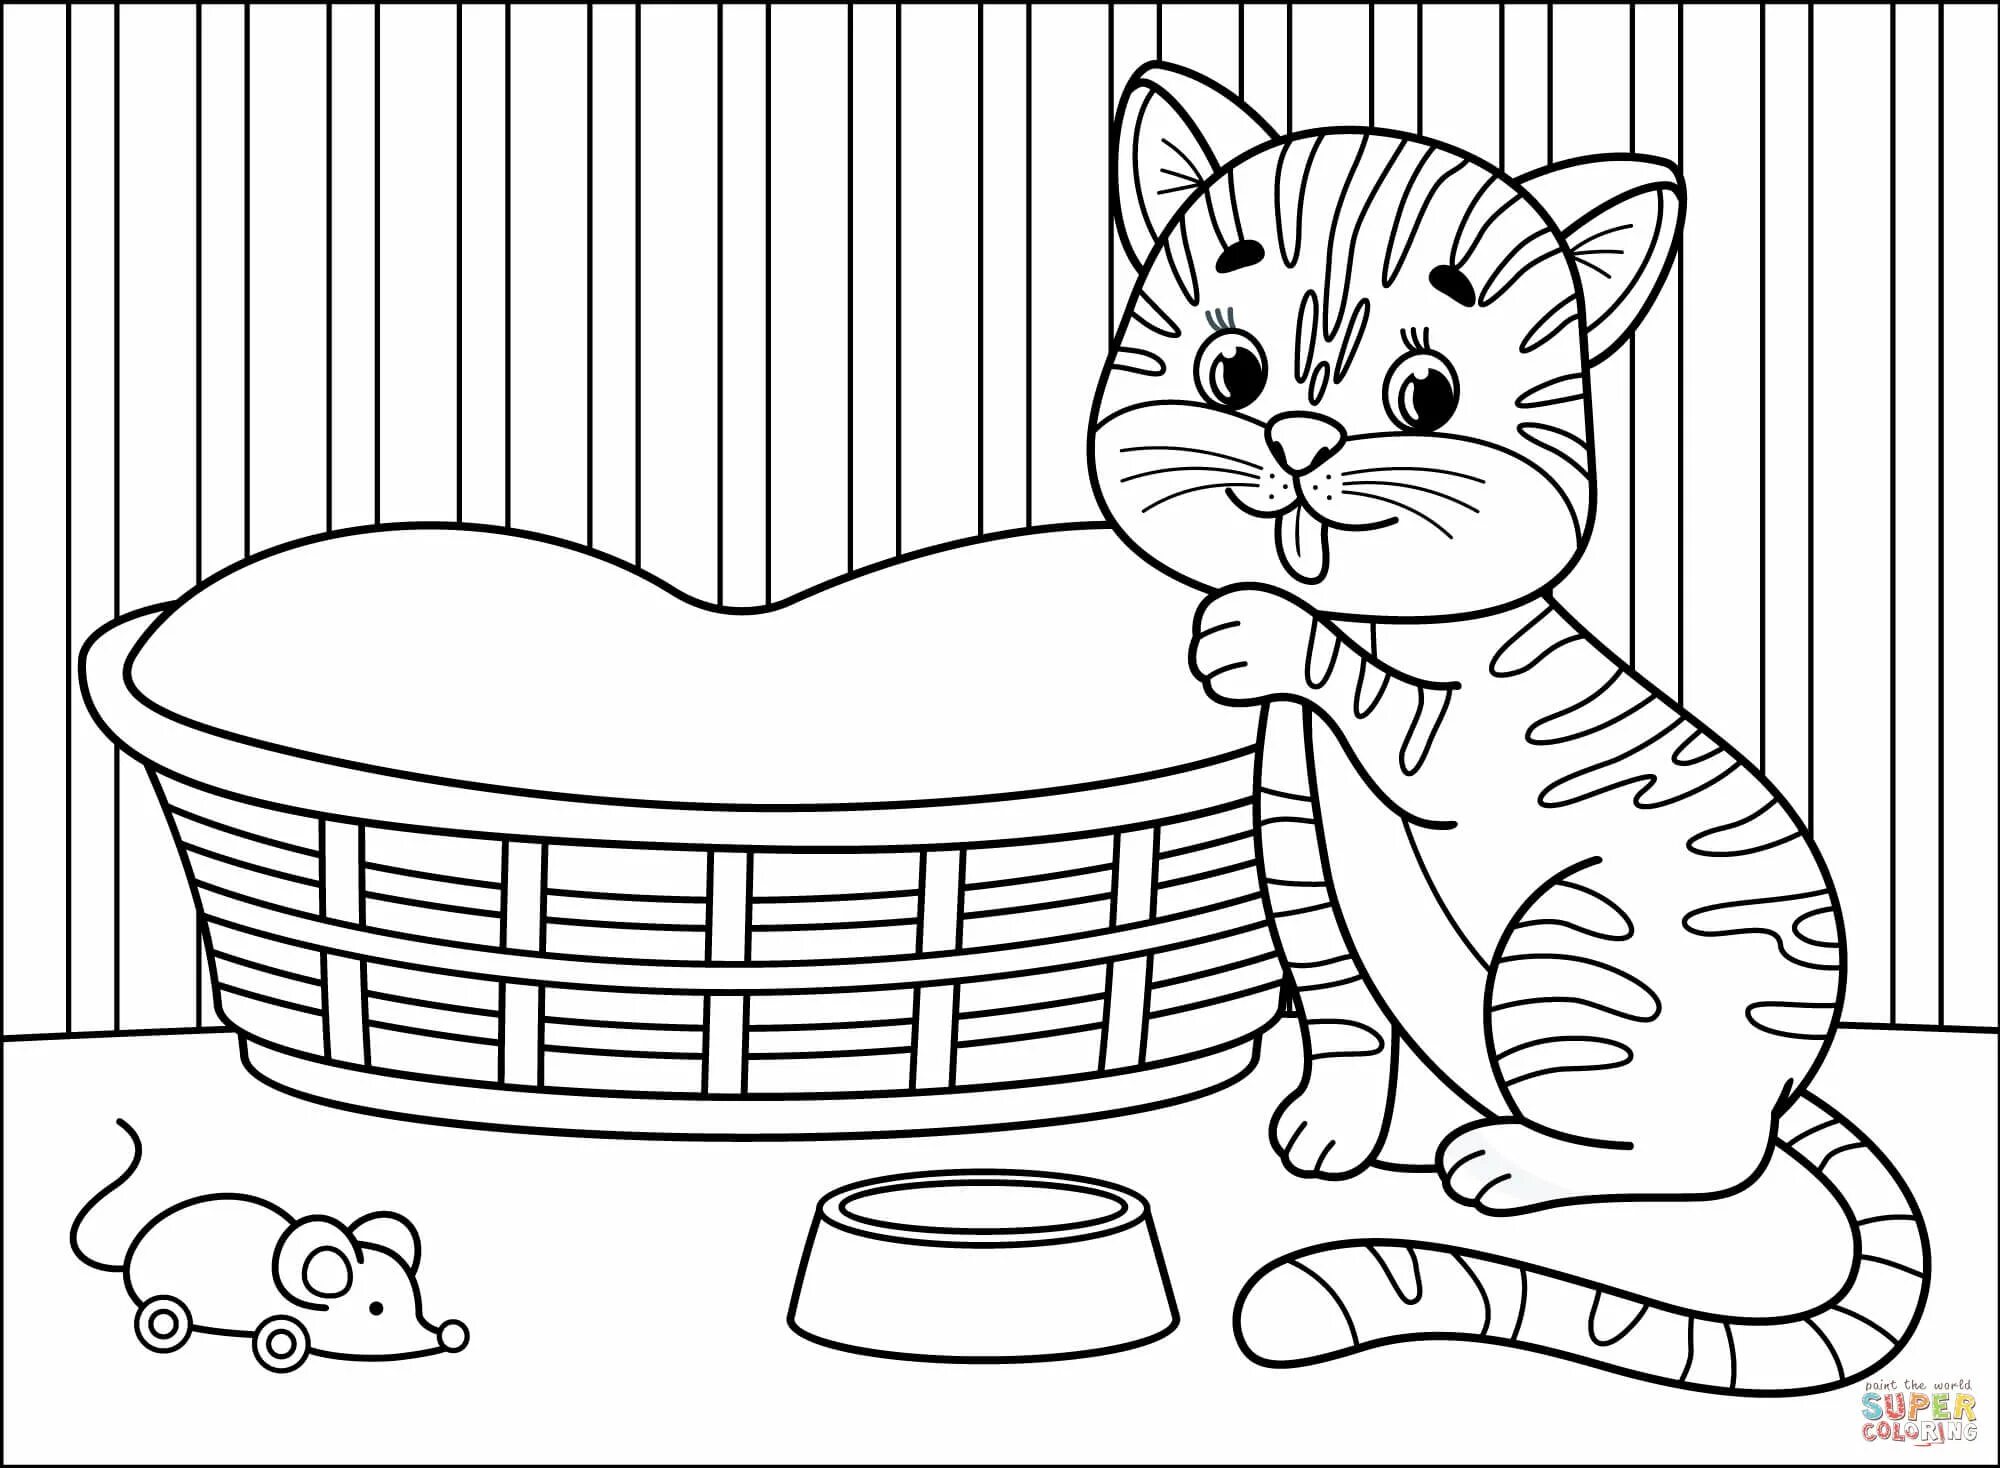 Magic cat coloring book for kids 5-6 years old